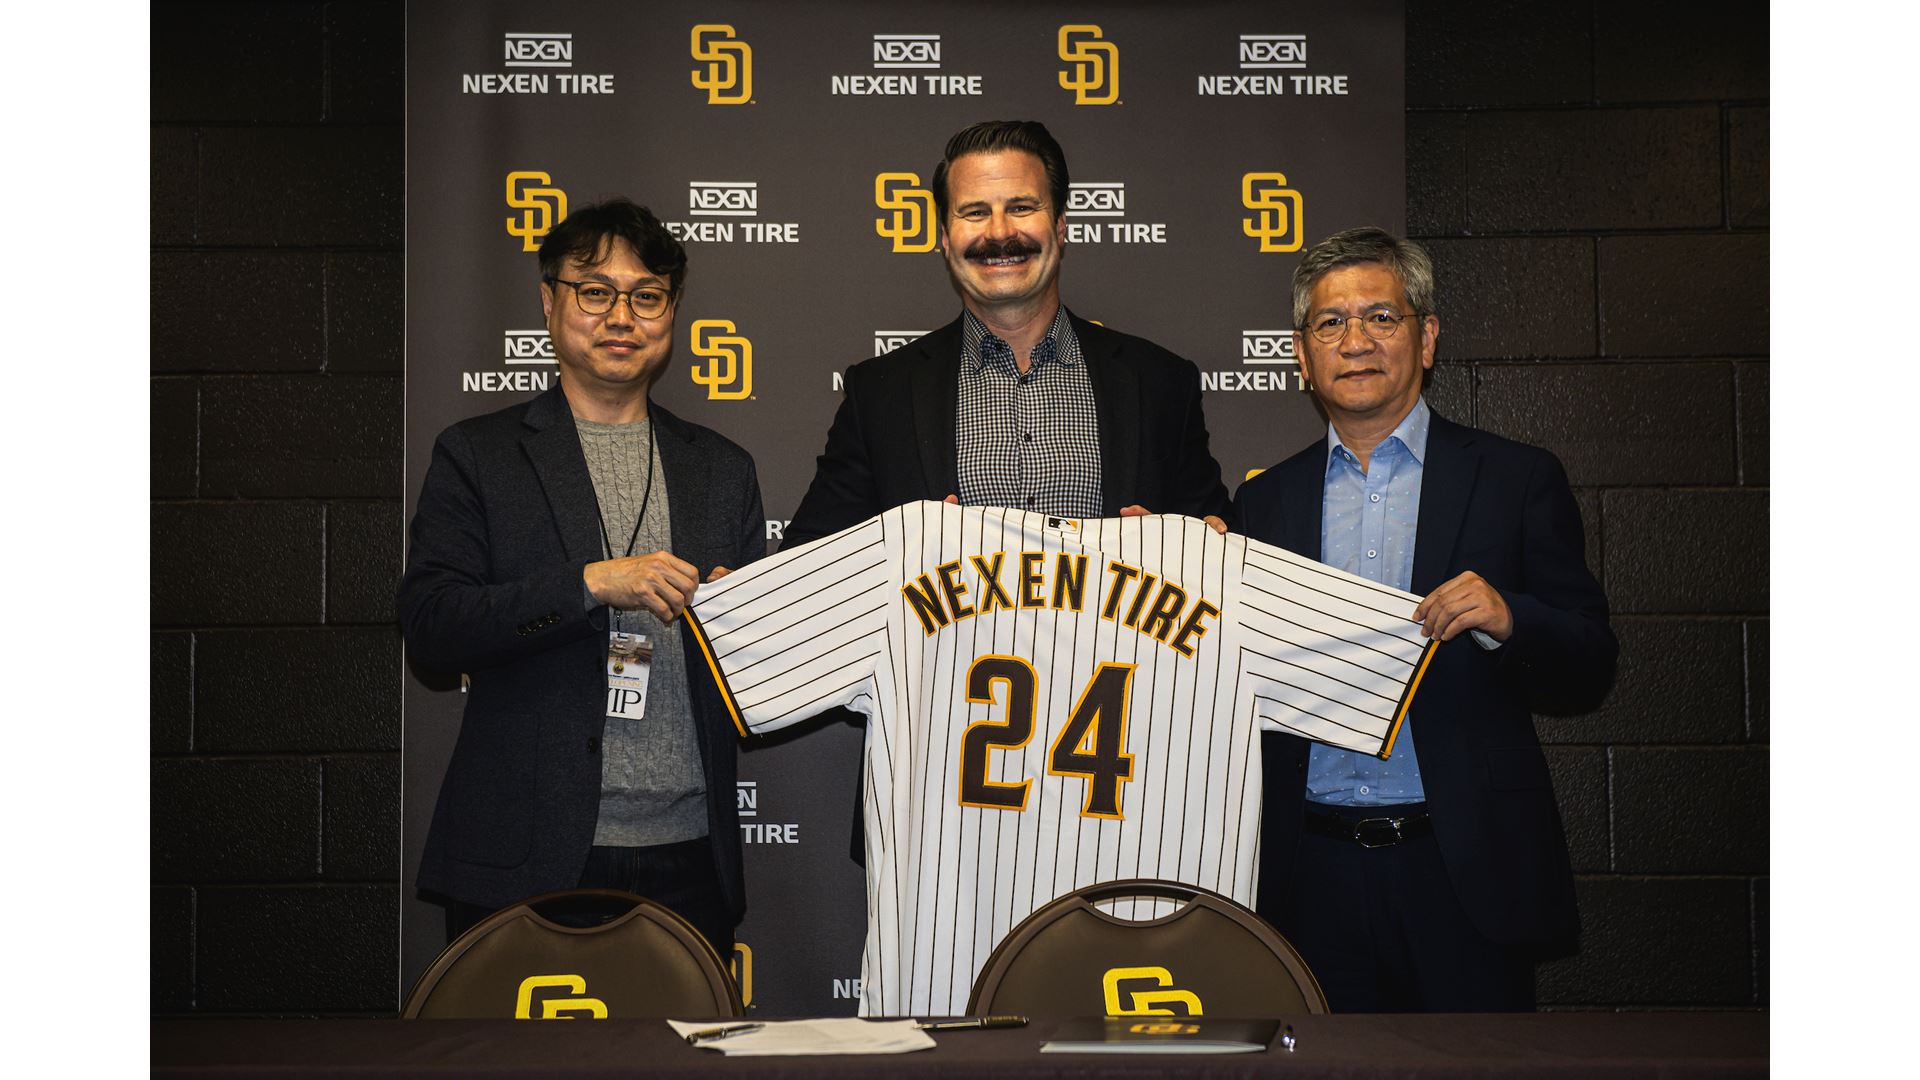 nexen-tire-becomes-exclusive-tire-partner-of-the-san-diego-padres